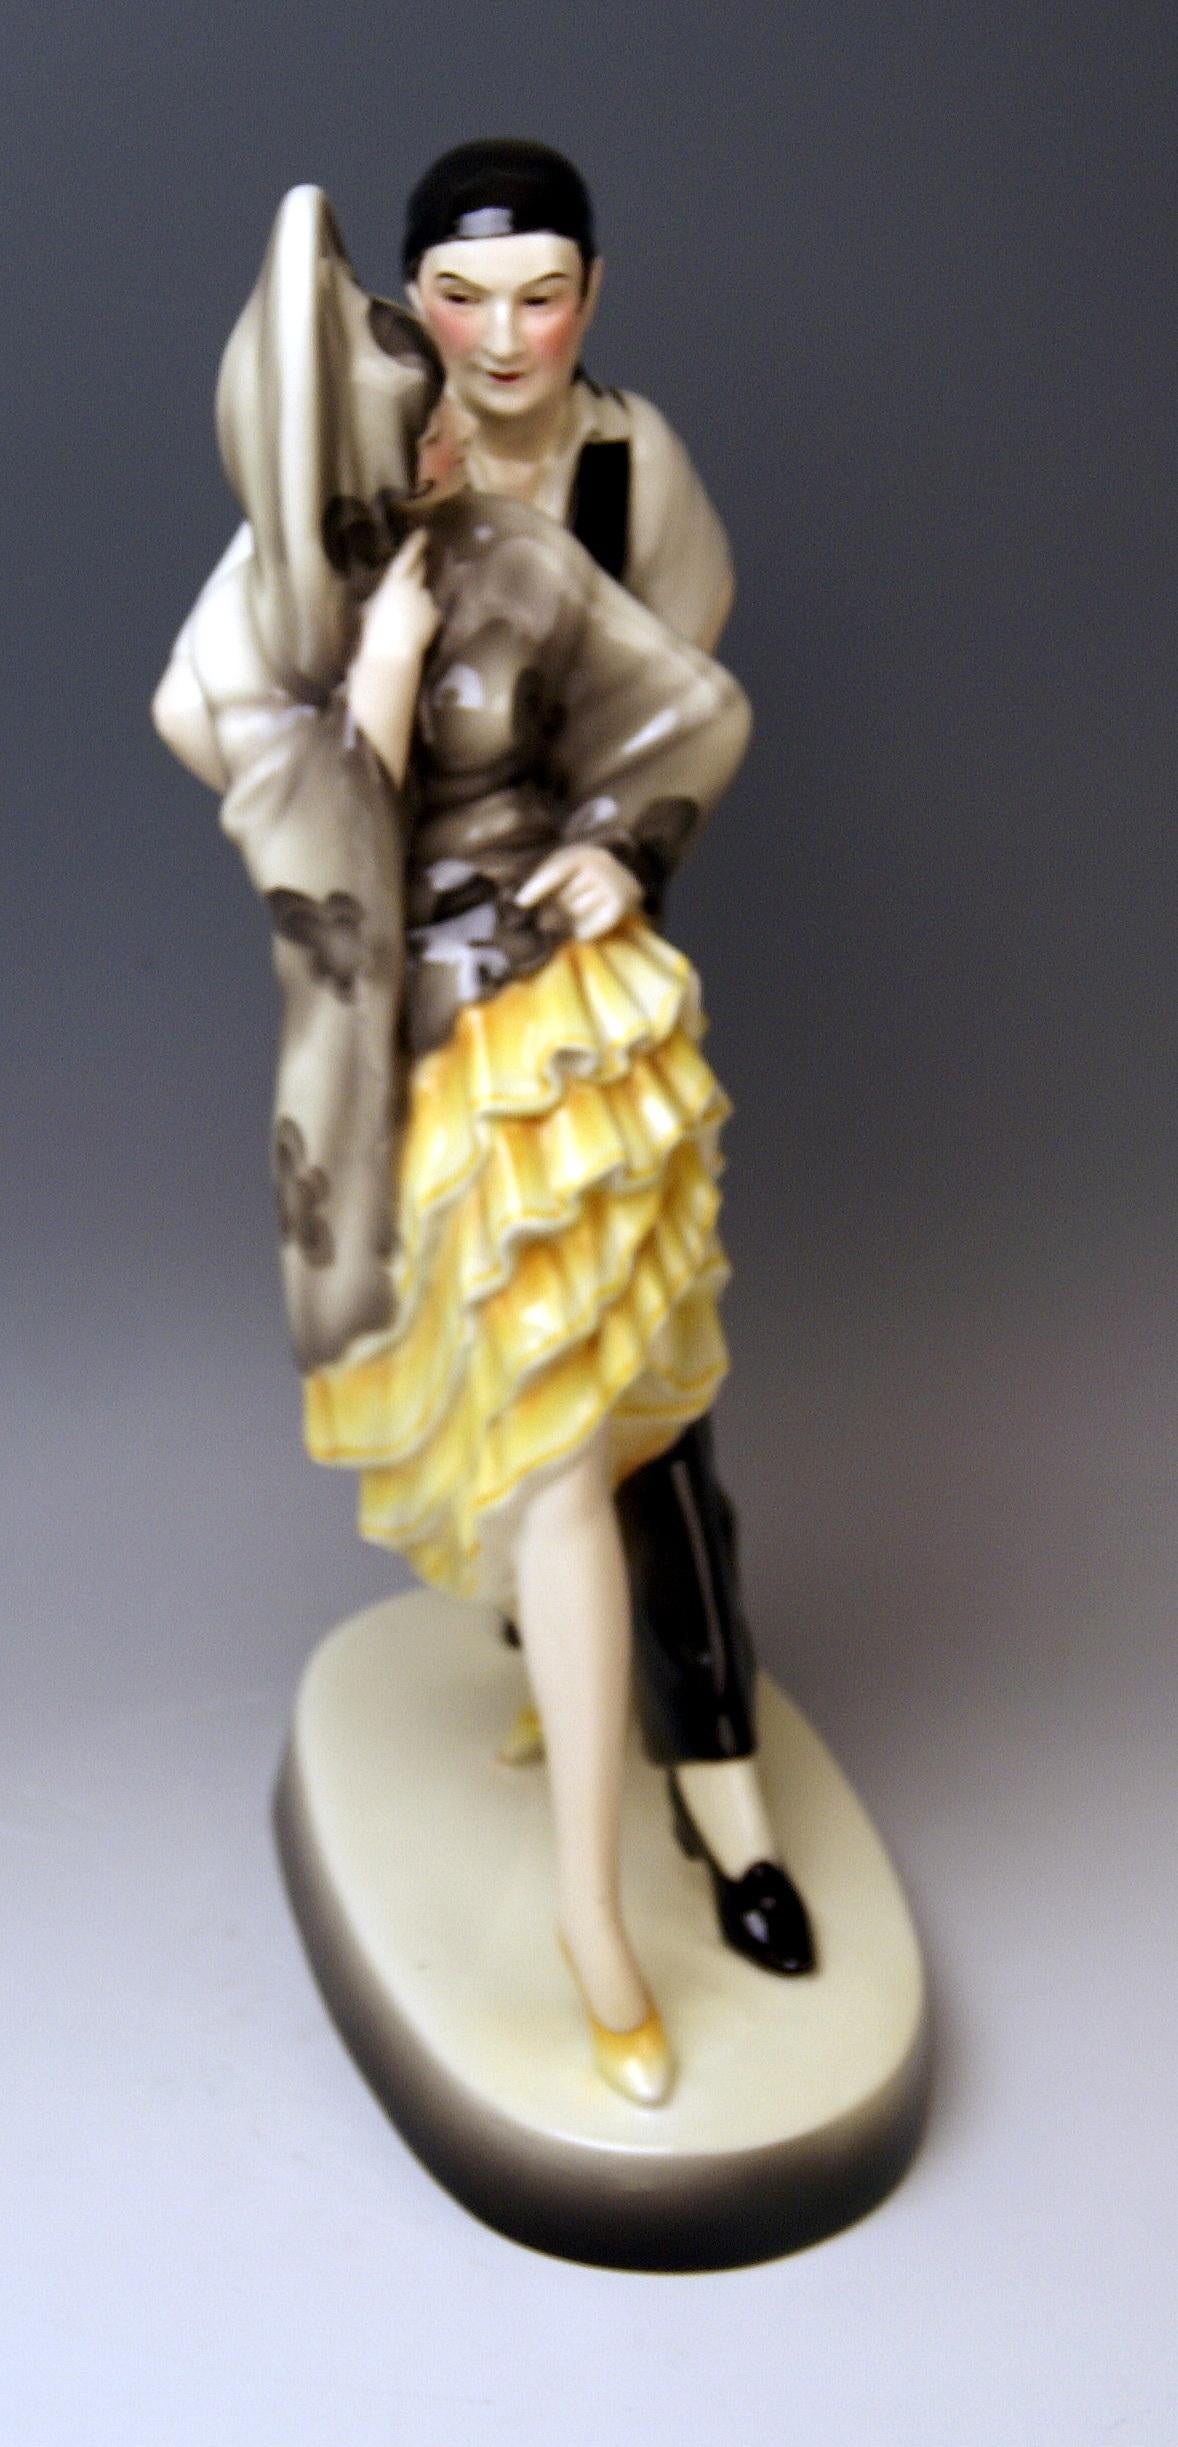 Goldscheider vienna gorgeous dancingy figurines: The Spanish Dance

Designed by Josef Lorenzl (1892-1950) / one of the most important designers having been active for Goldscheider manufactory in period of 1920-1940 / designed 1928.

Made circa